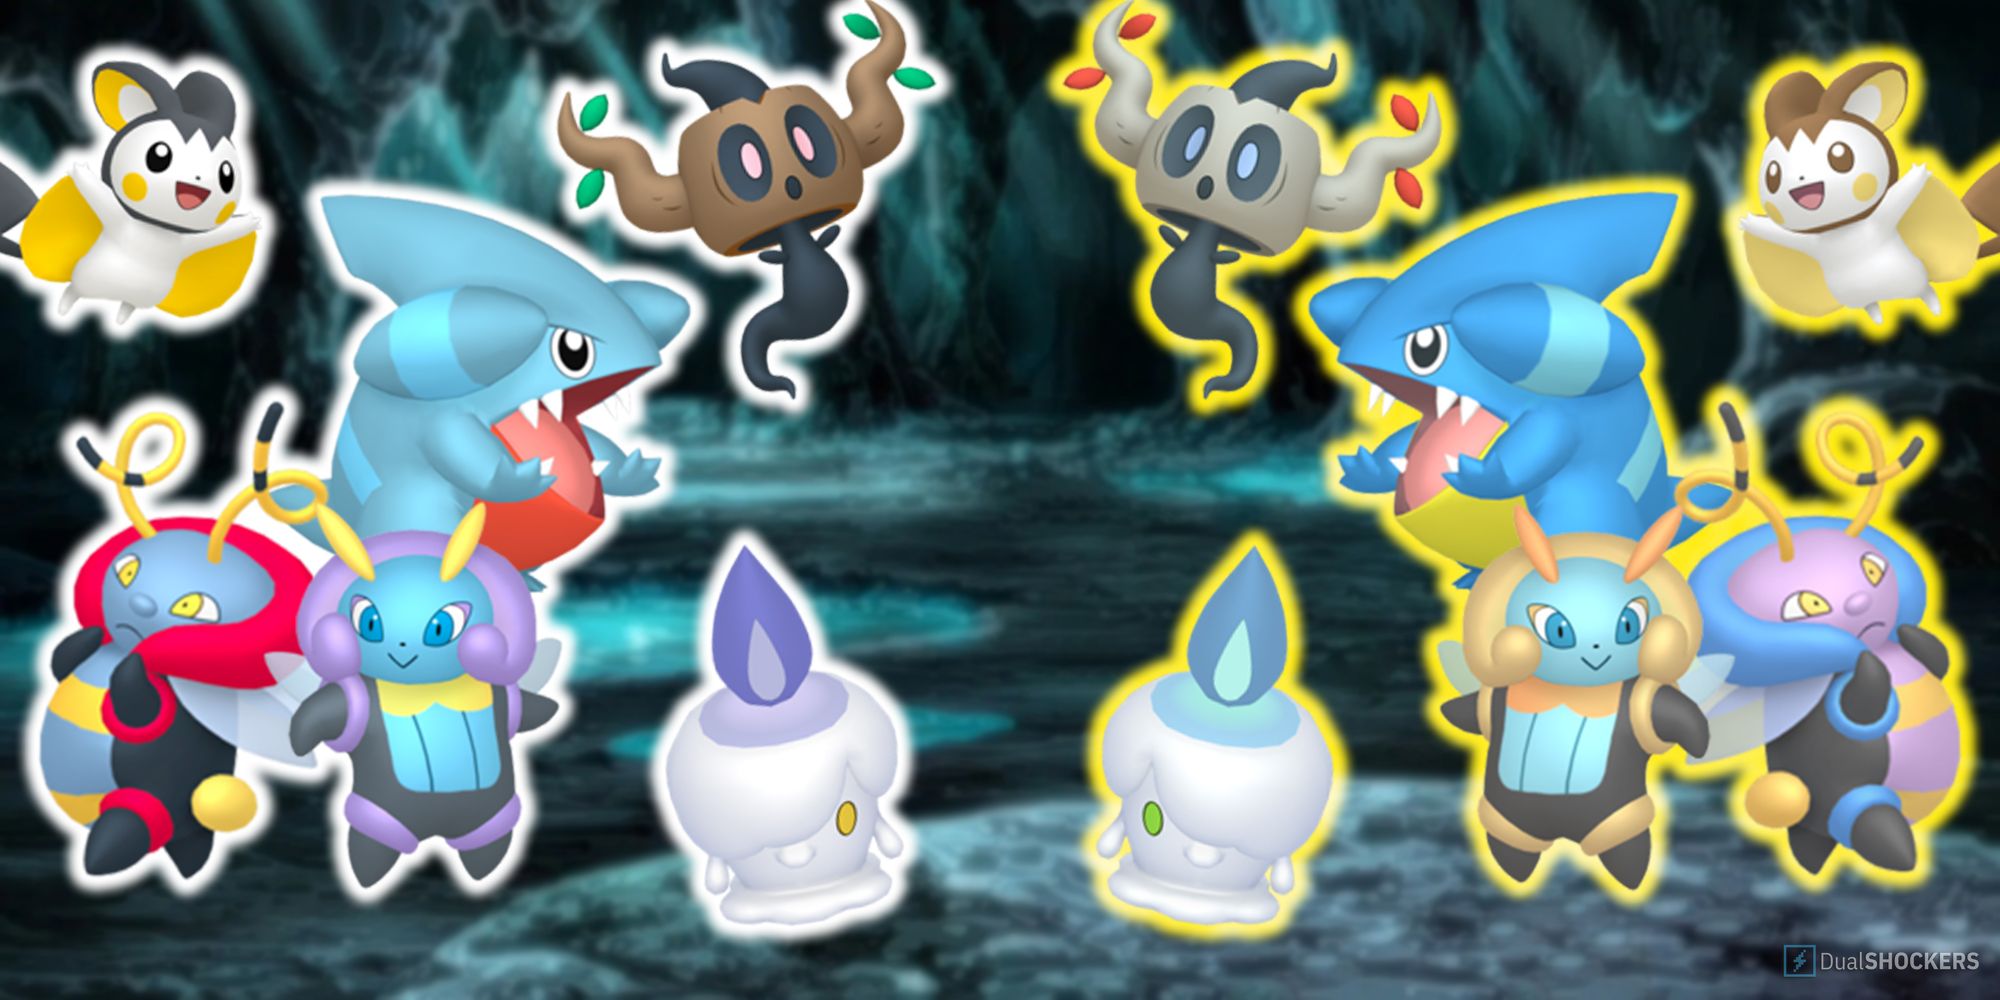 Emolga, Illumise, Volbeat, Gible, Litwick, and Phantump with their shiny forms in Pokemon GO.